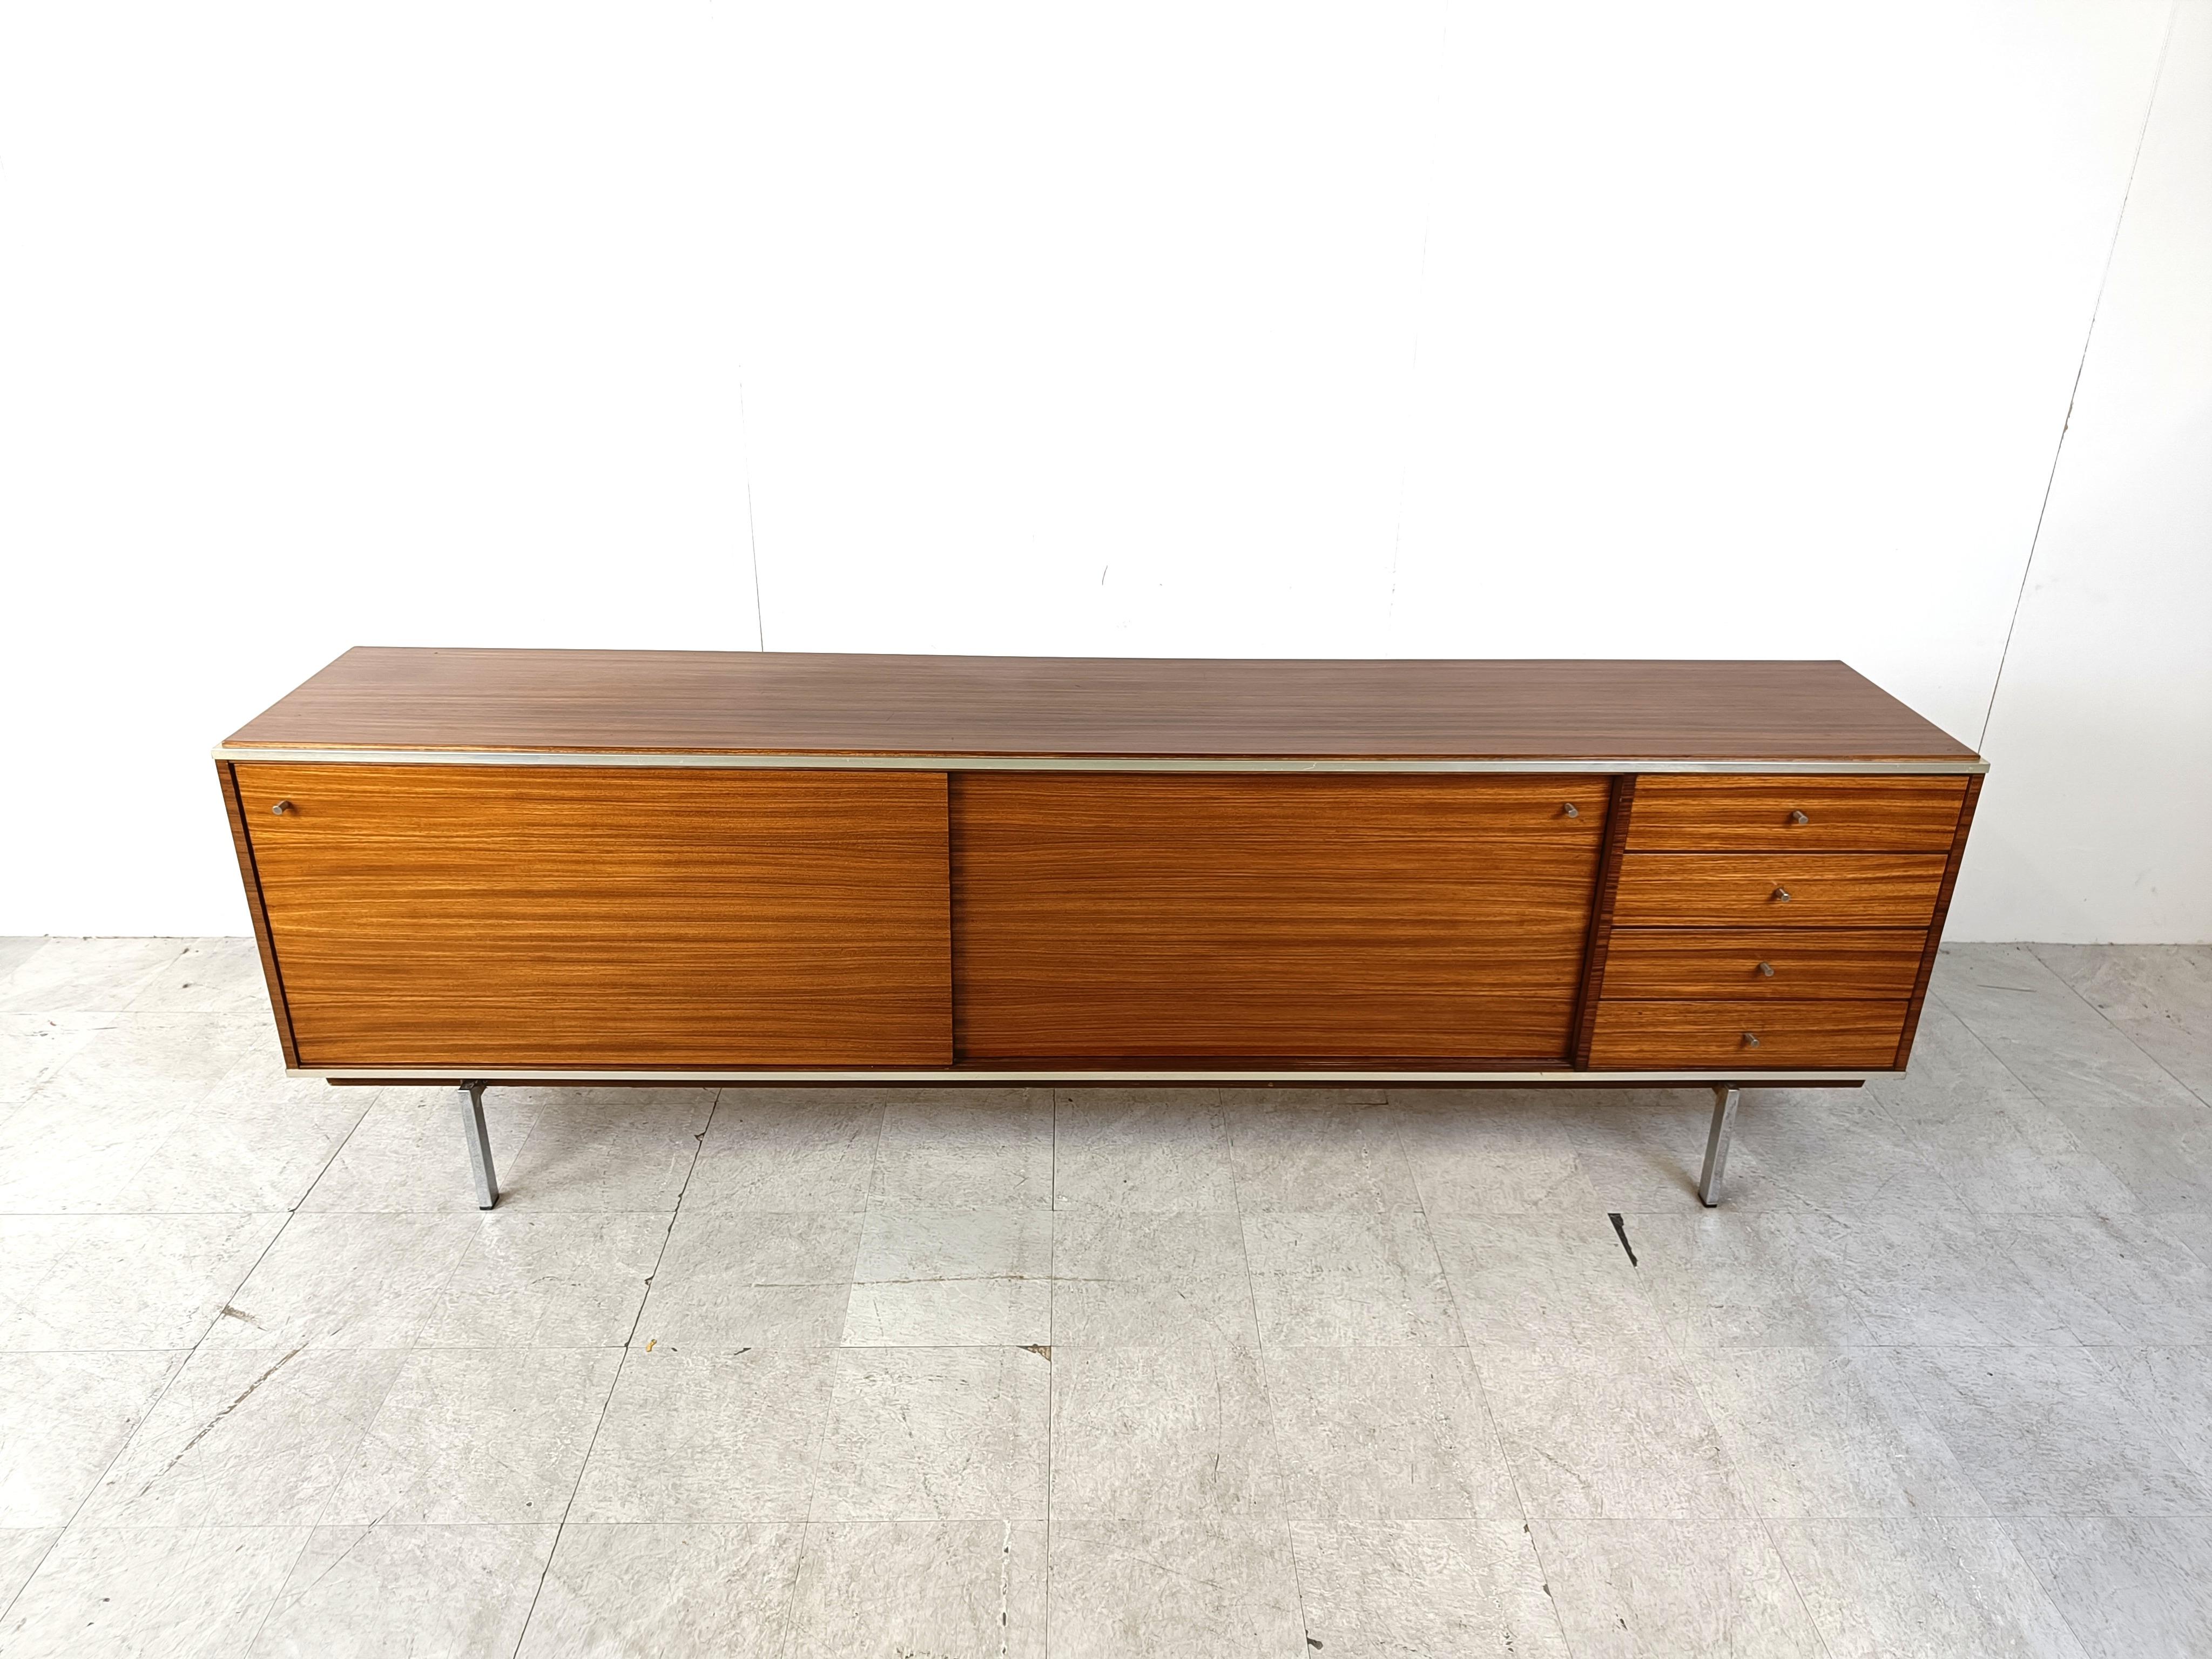 Mid century modern sideboard by Pieter de Bruyne for AL meubel.

Beautiful timeless design with a beautiful wood patern.

Chromed steel legs.

Good condition with normal age related wear.

1960s - Belgium

Dimensions:
Lenght: 255cm
Height: